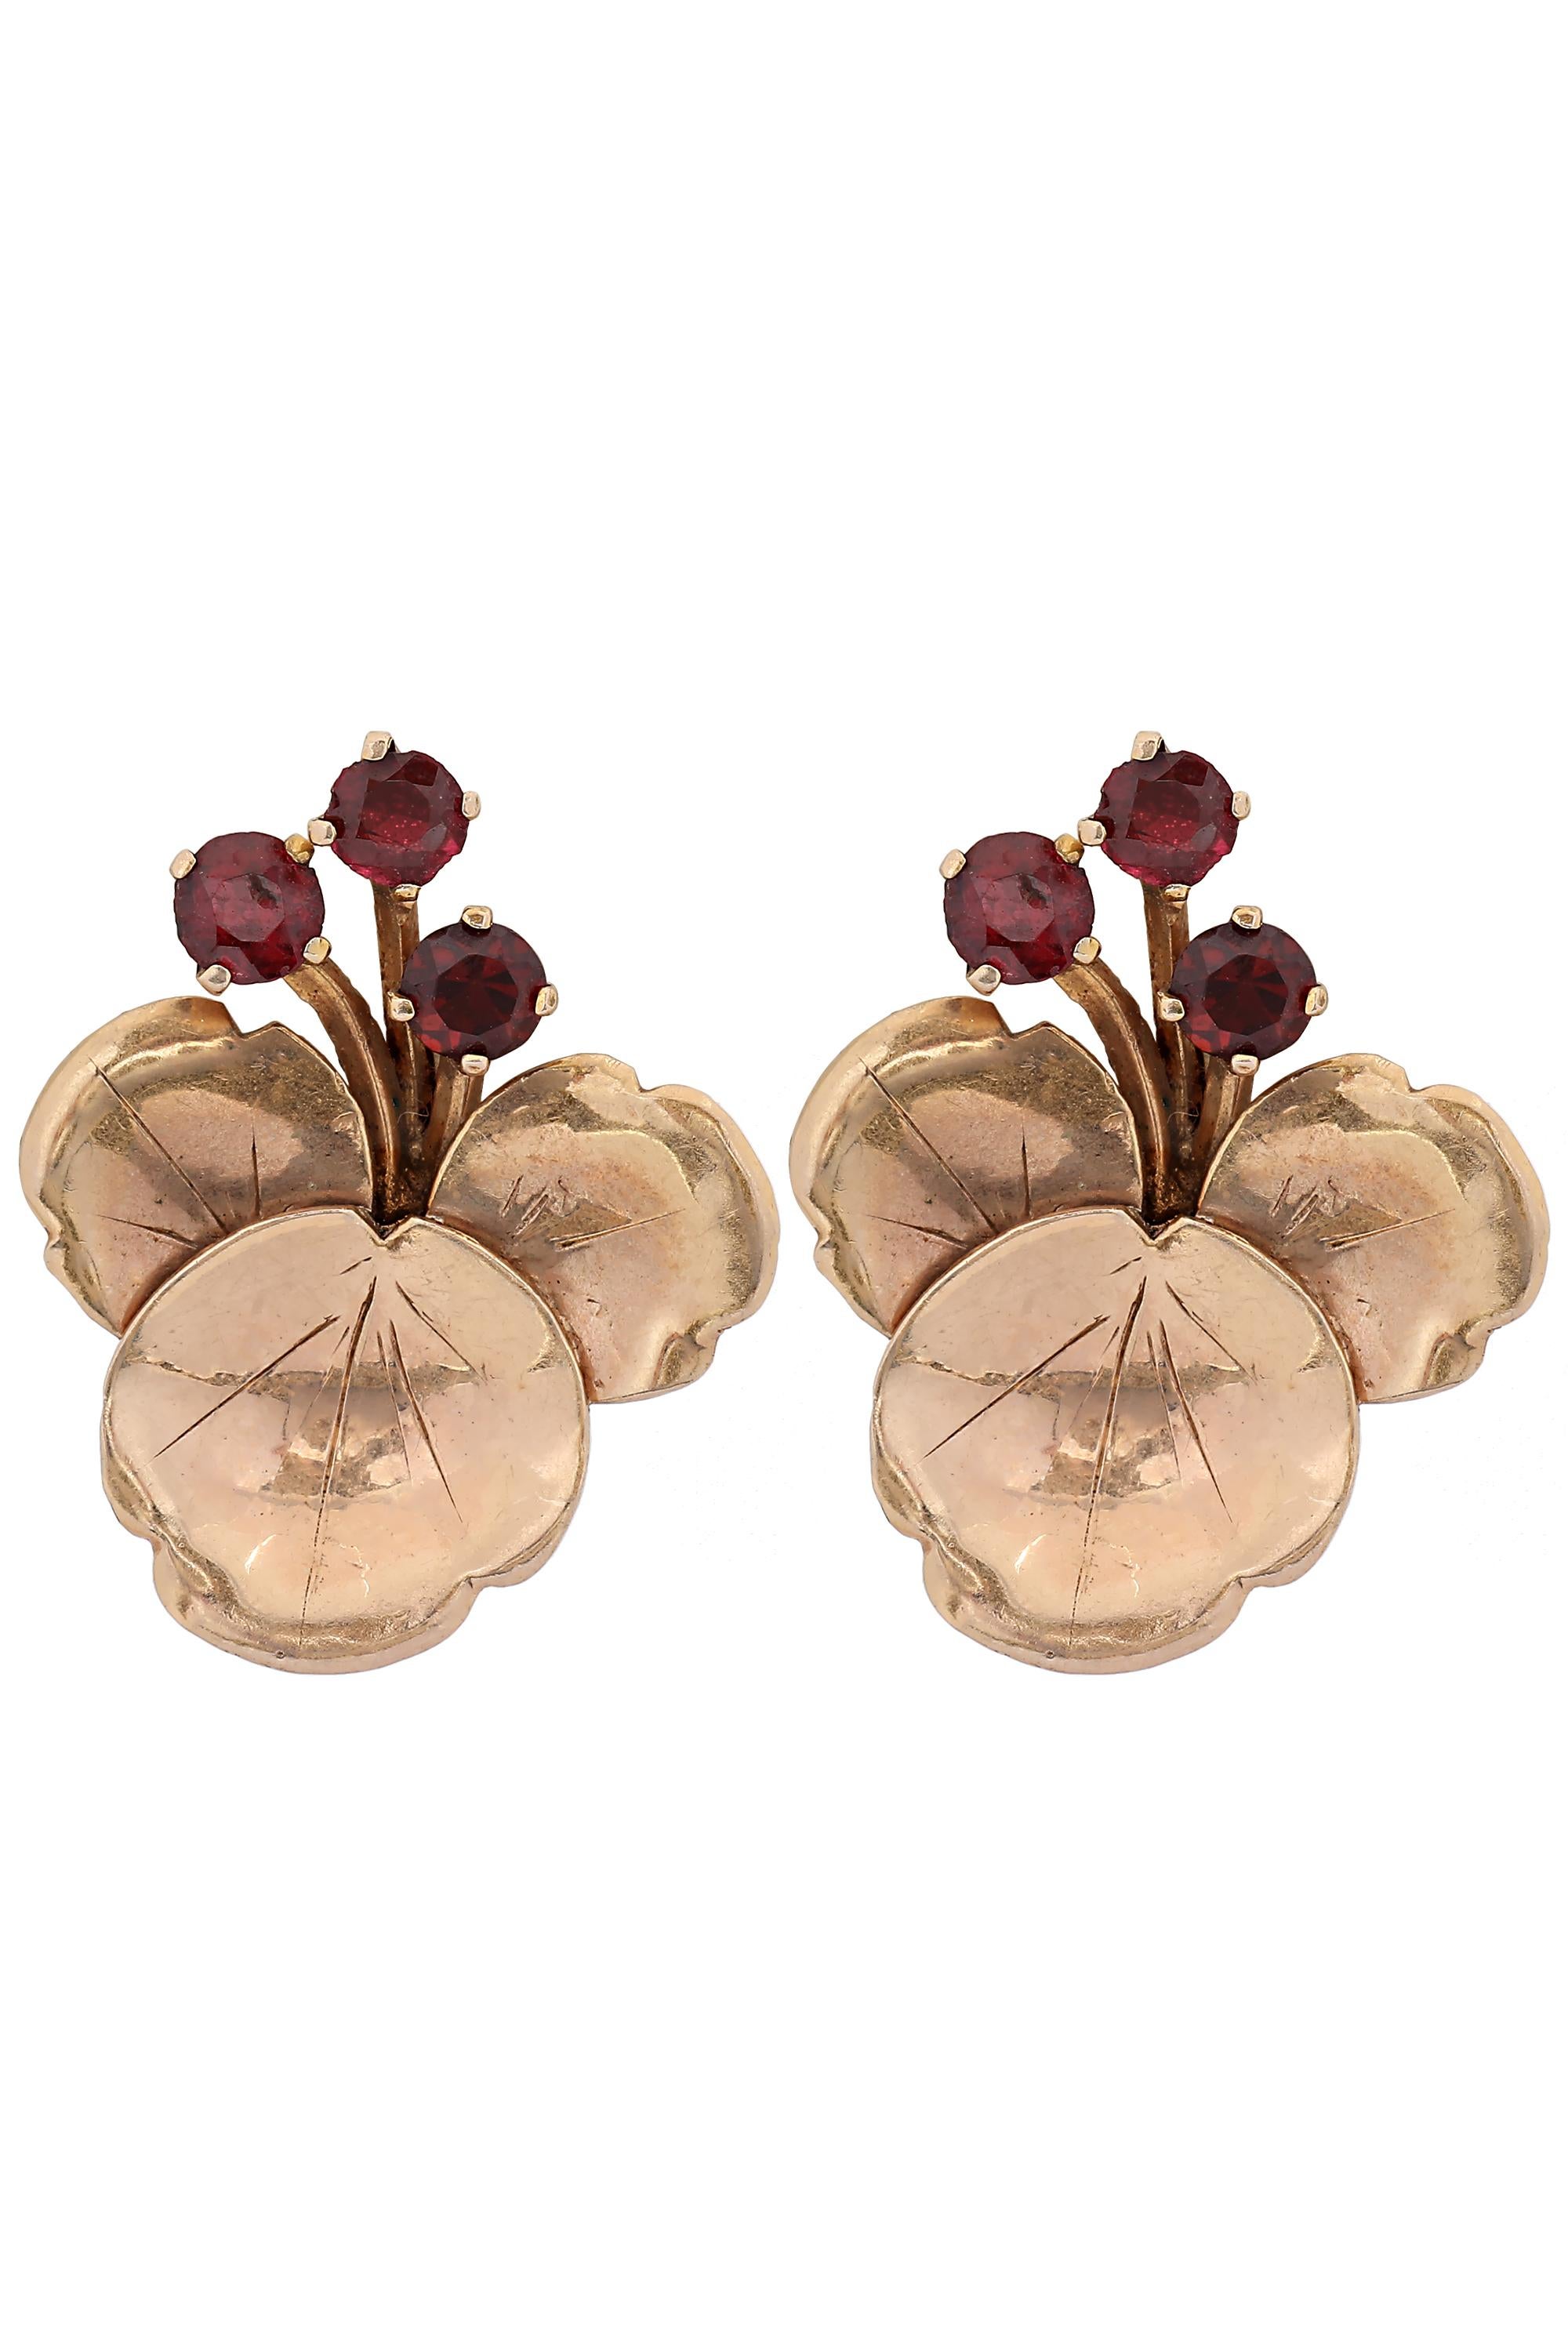 Vintage Ruby Leaf Floral Earrings 14k Yellow Gold In Good Condition For Sale In beverly hills, CA